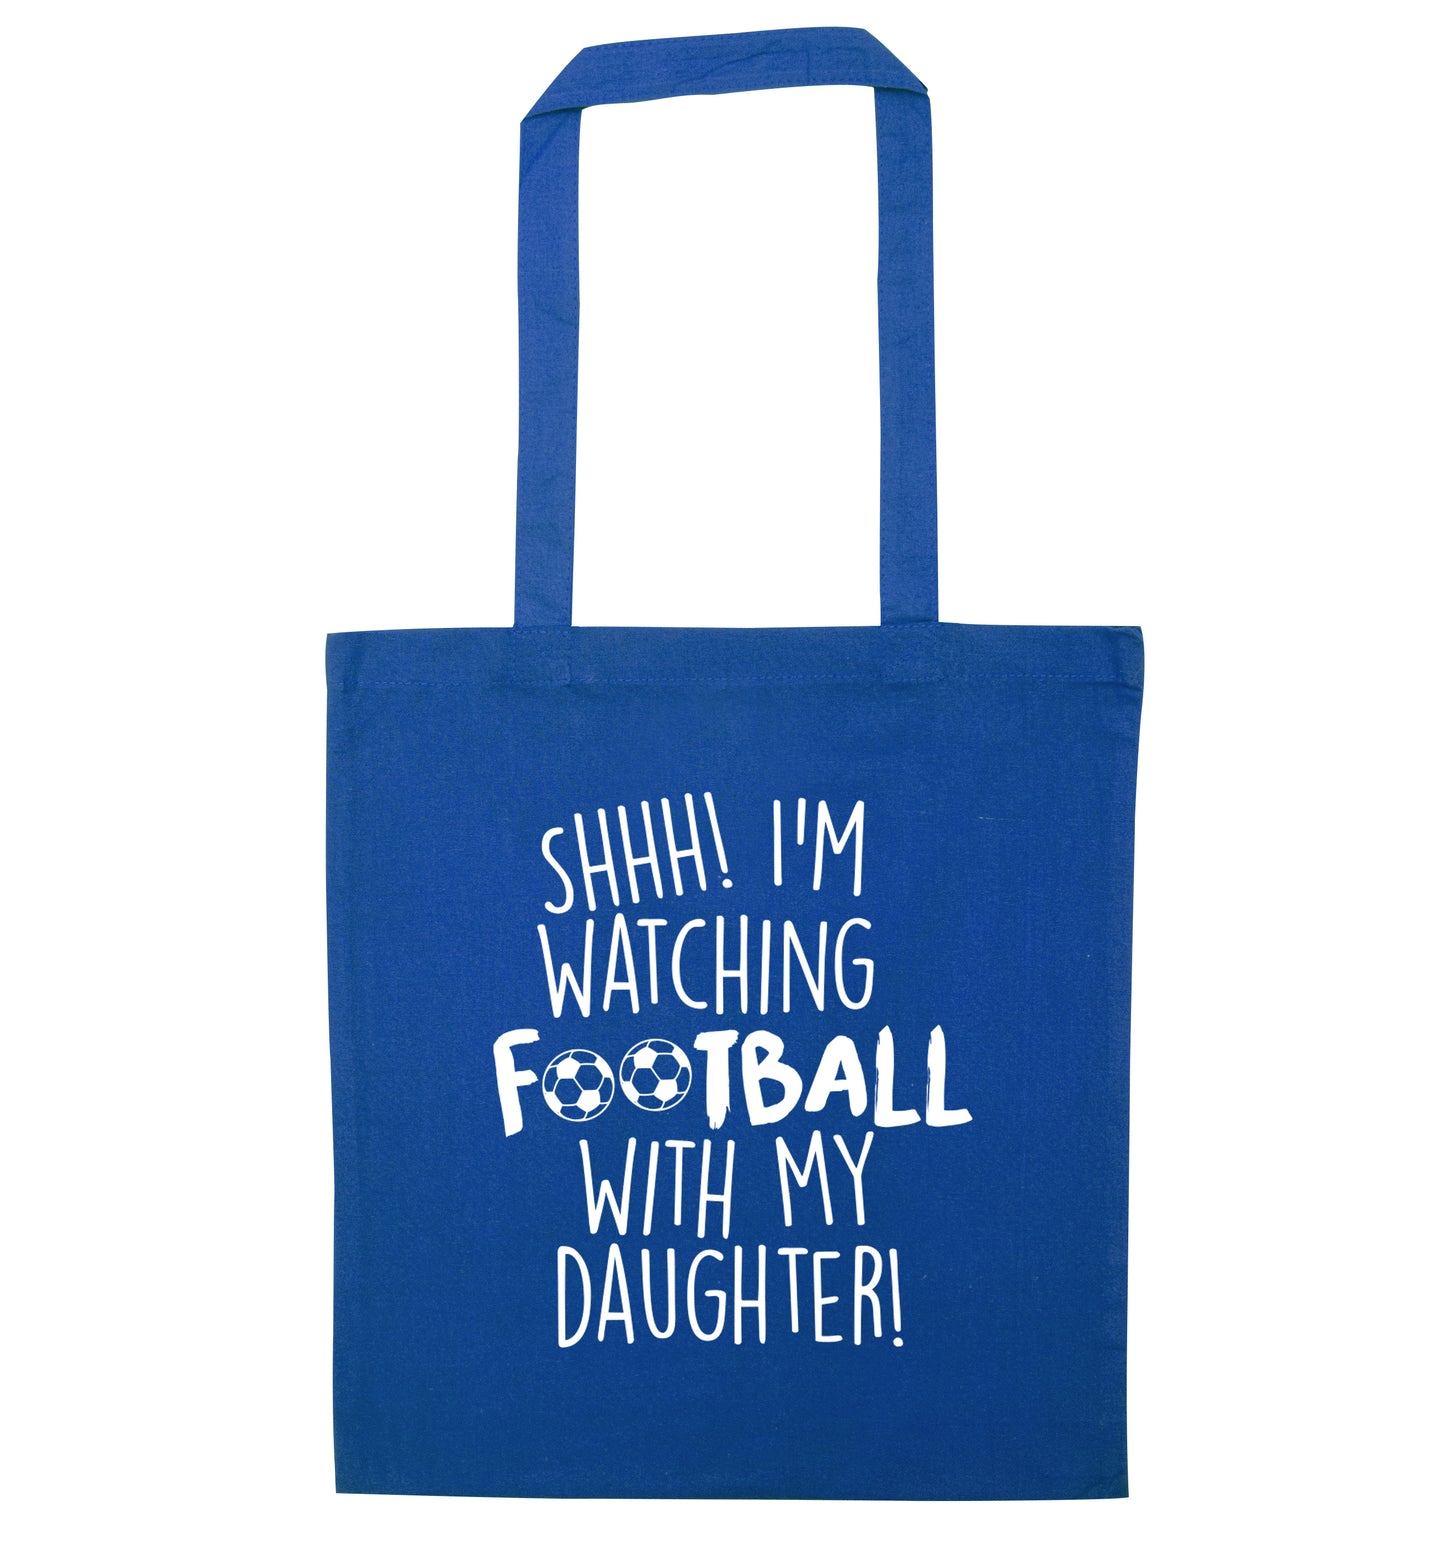 Shhh I'm watching football with my daughter blue tote bag